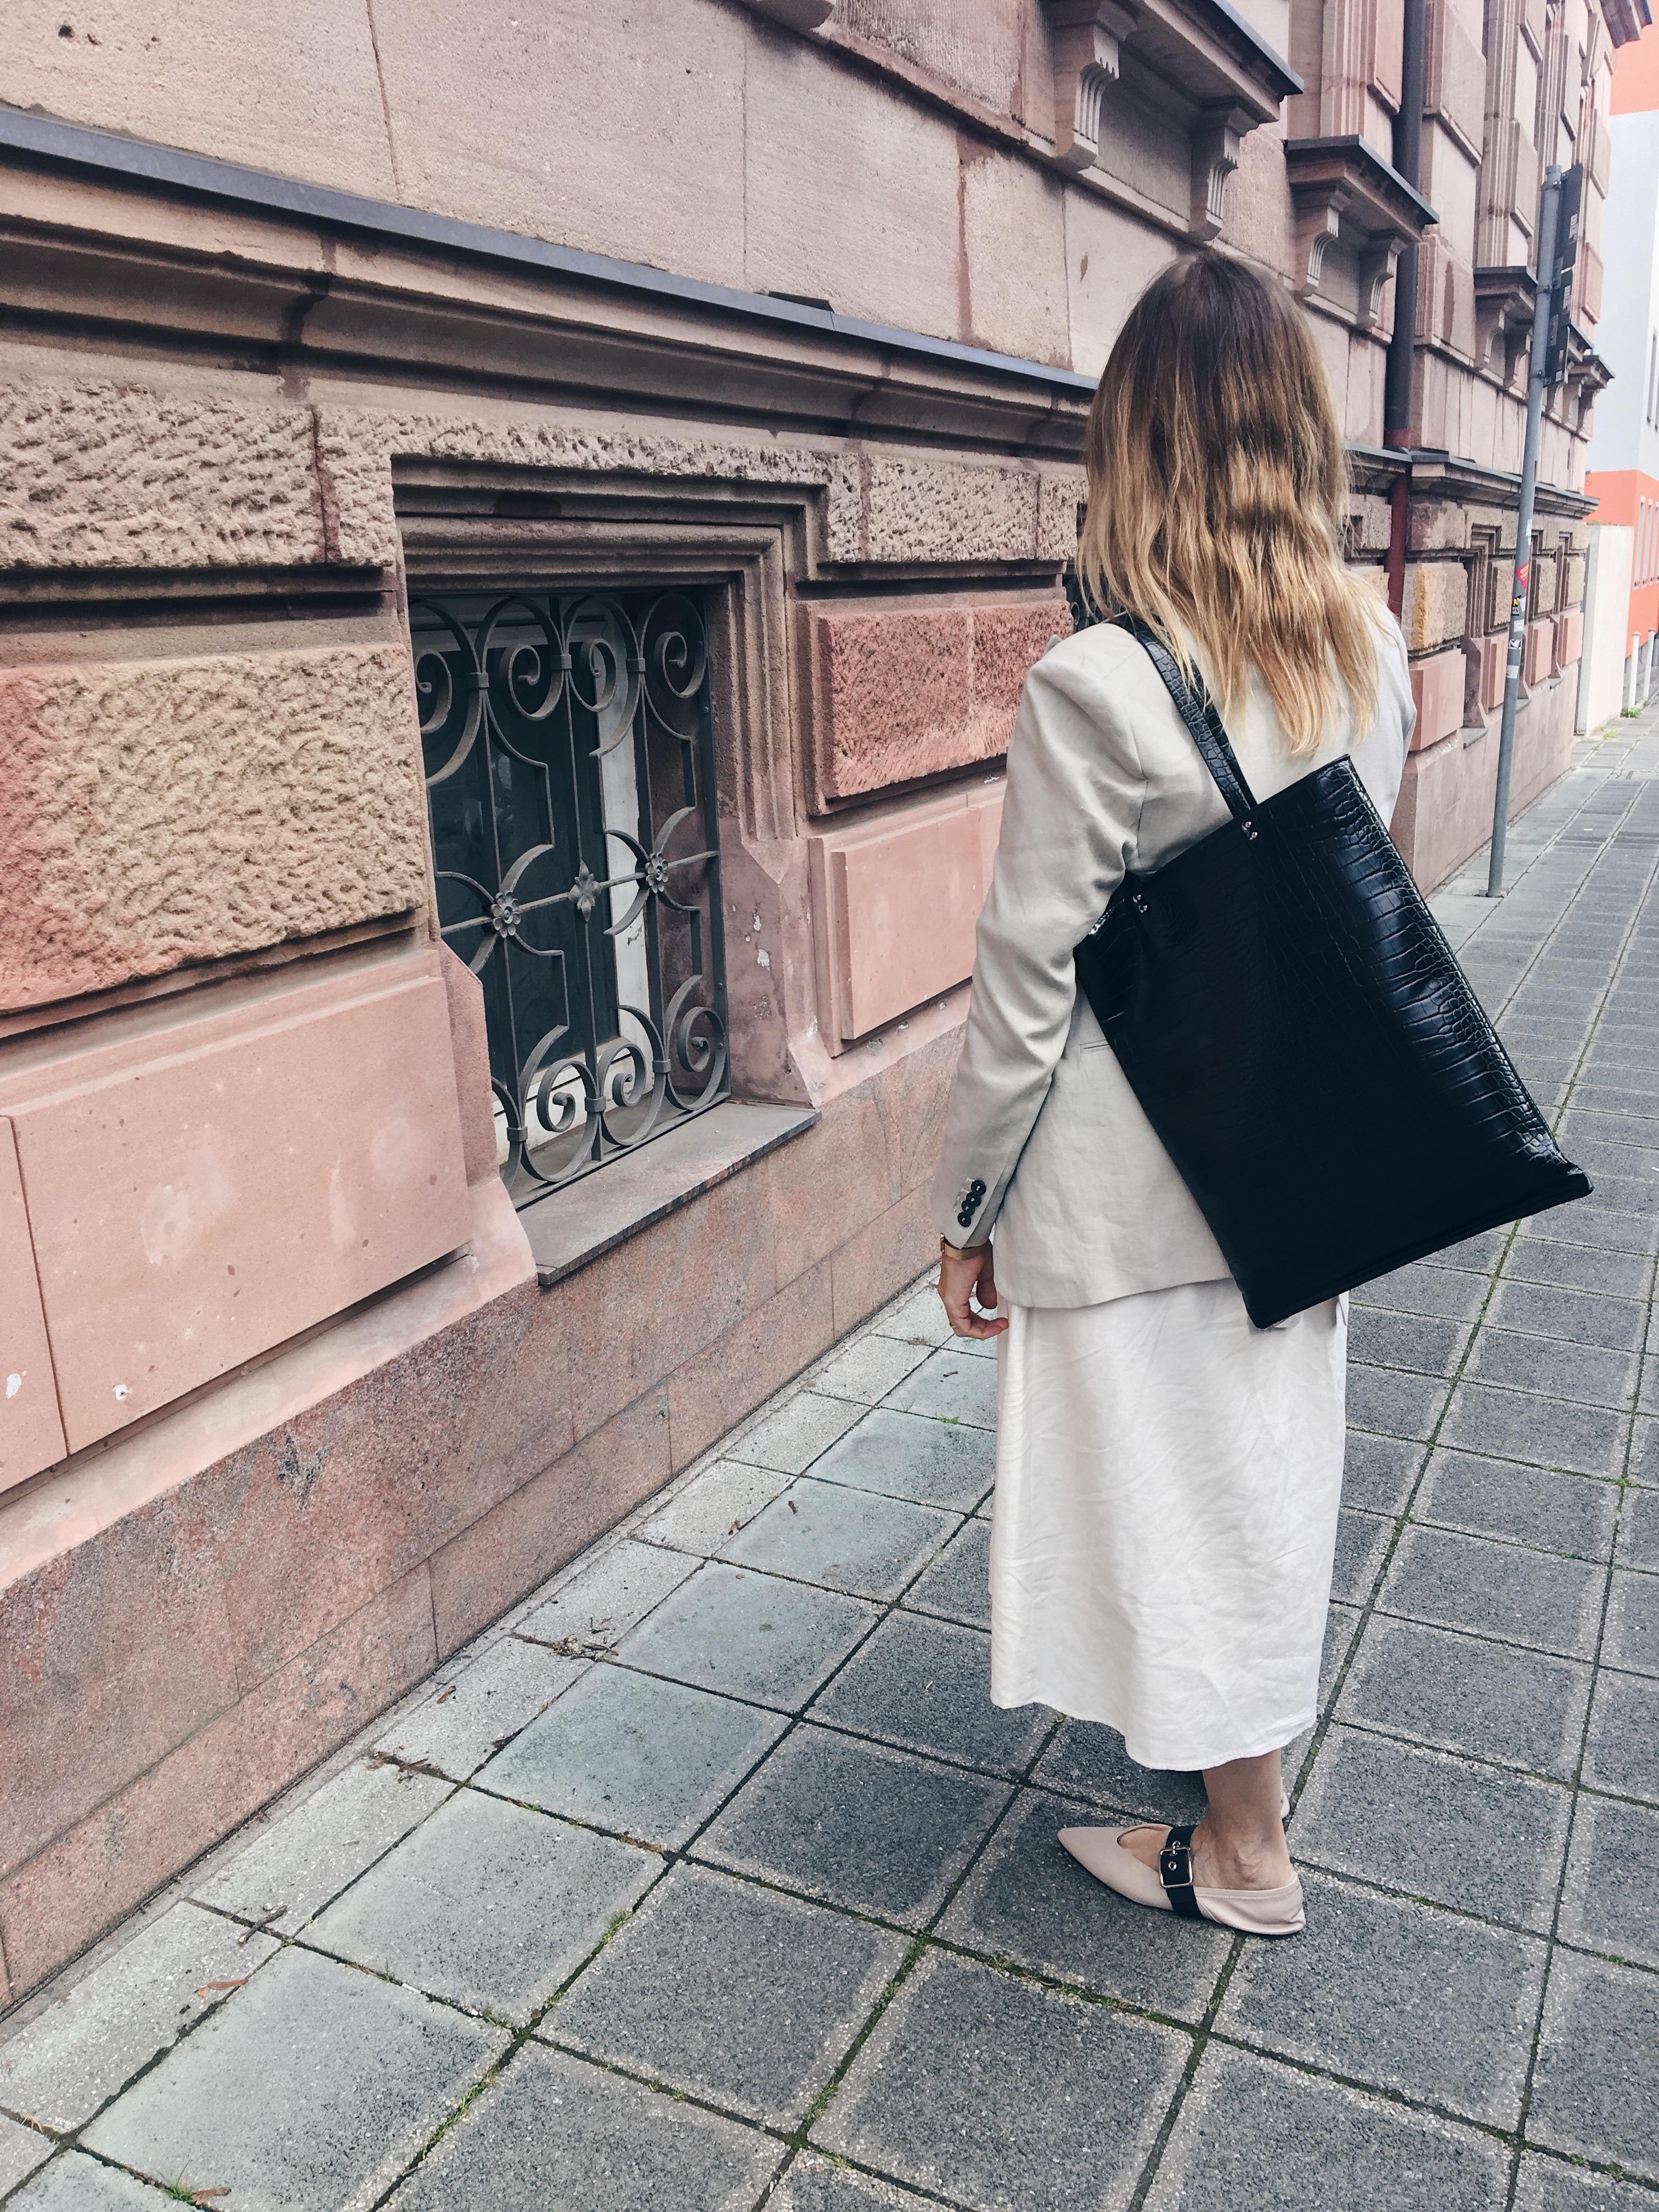 Weekend with my #shopping-bag 🖤#streetstyle #fashionlover #zarabag #fashionblogger #zarawoman #ootd #lookoftoday #outfit